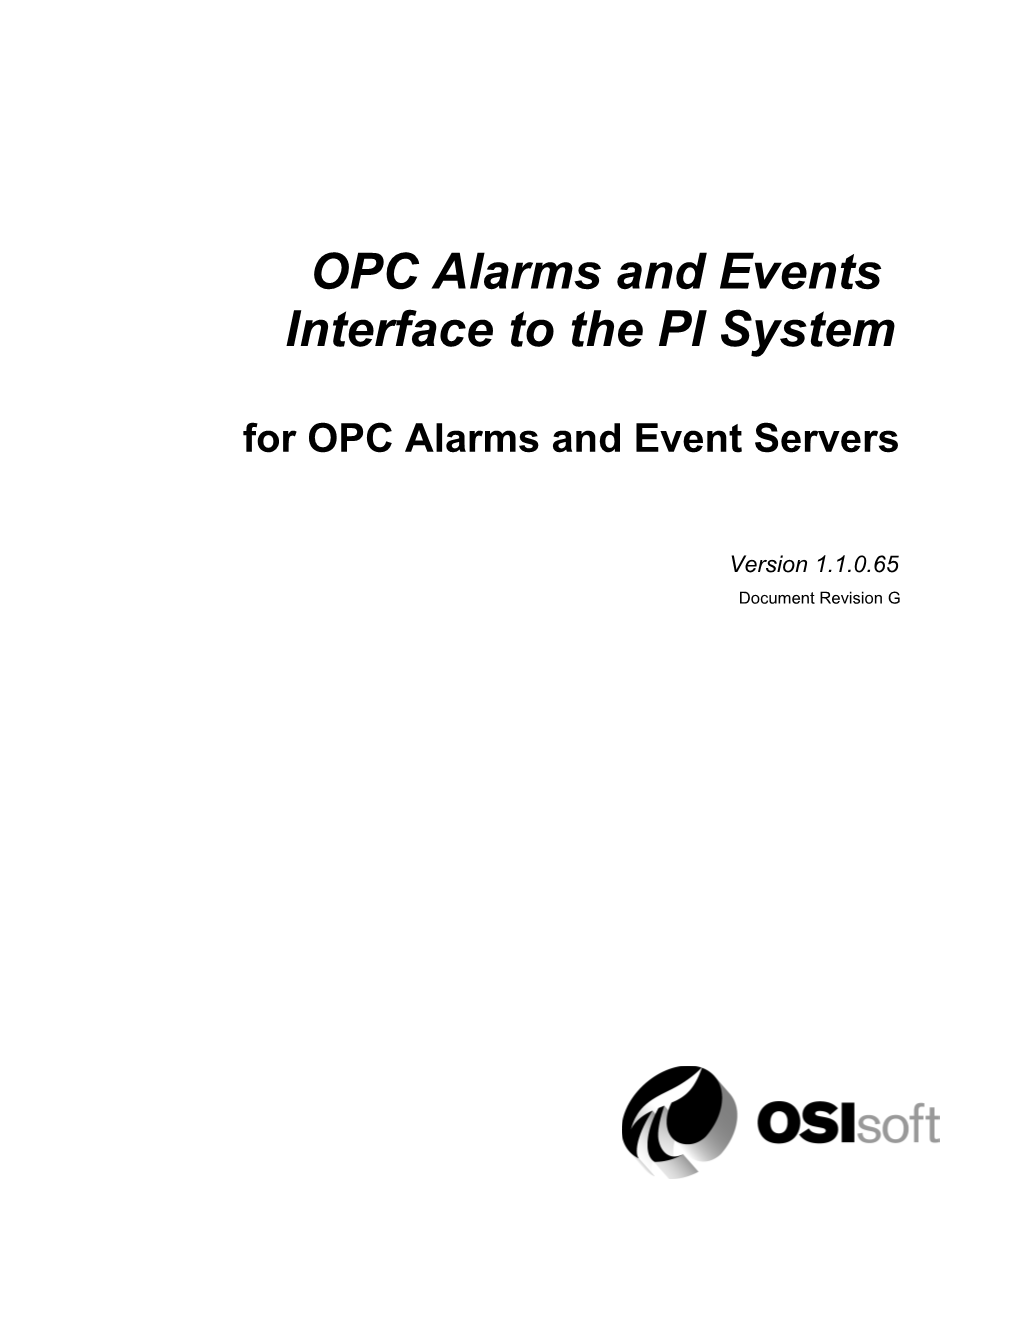 OPC Alarms and Events Interface to the PI System